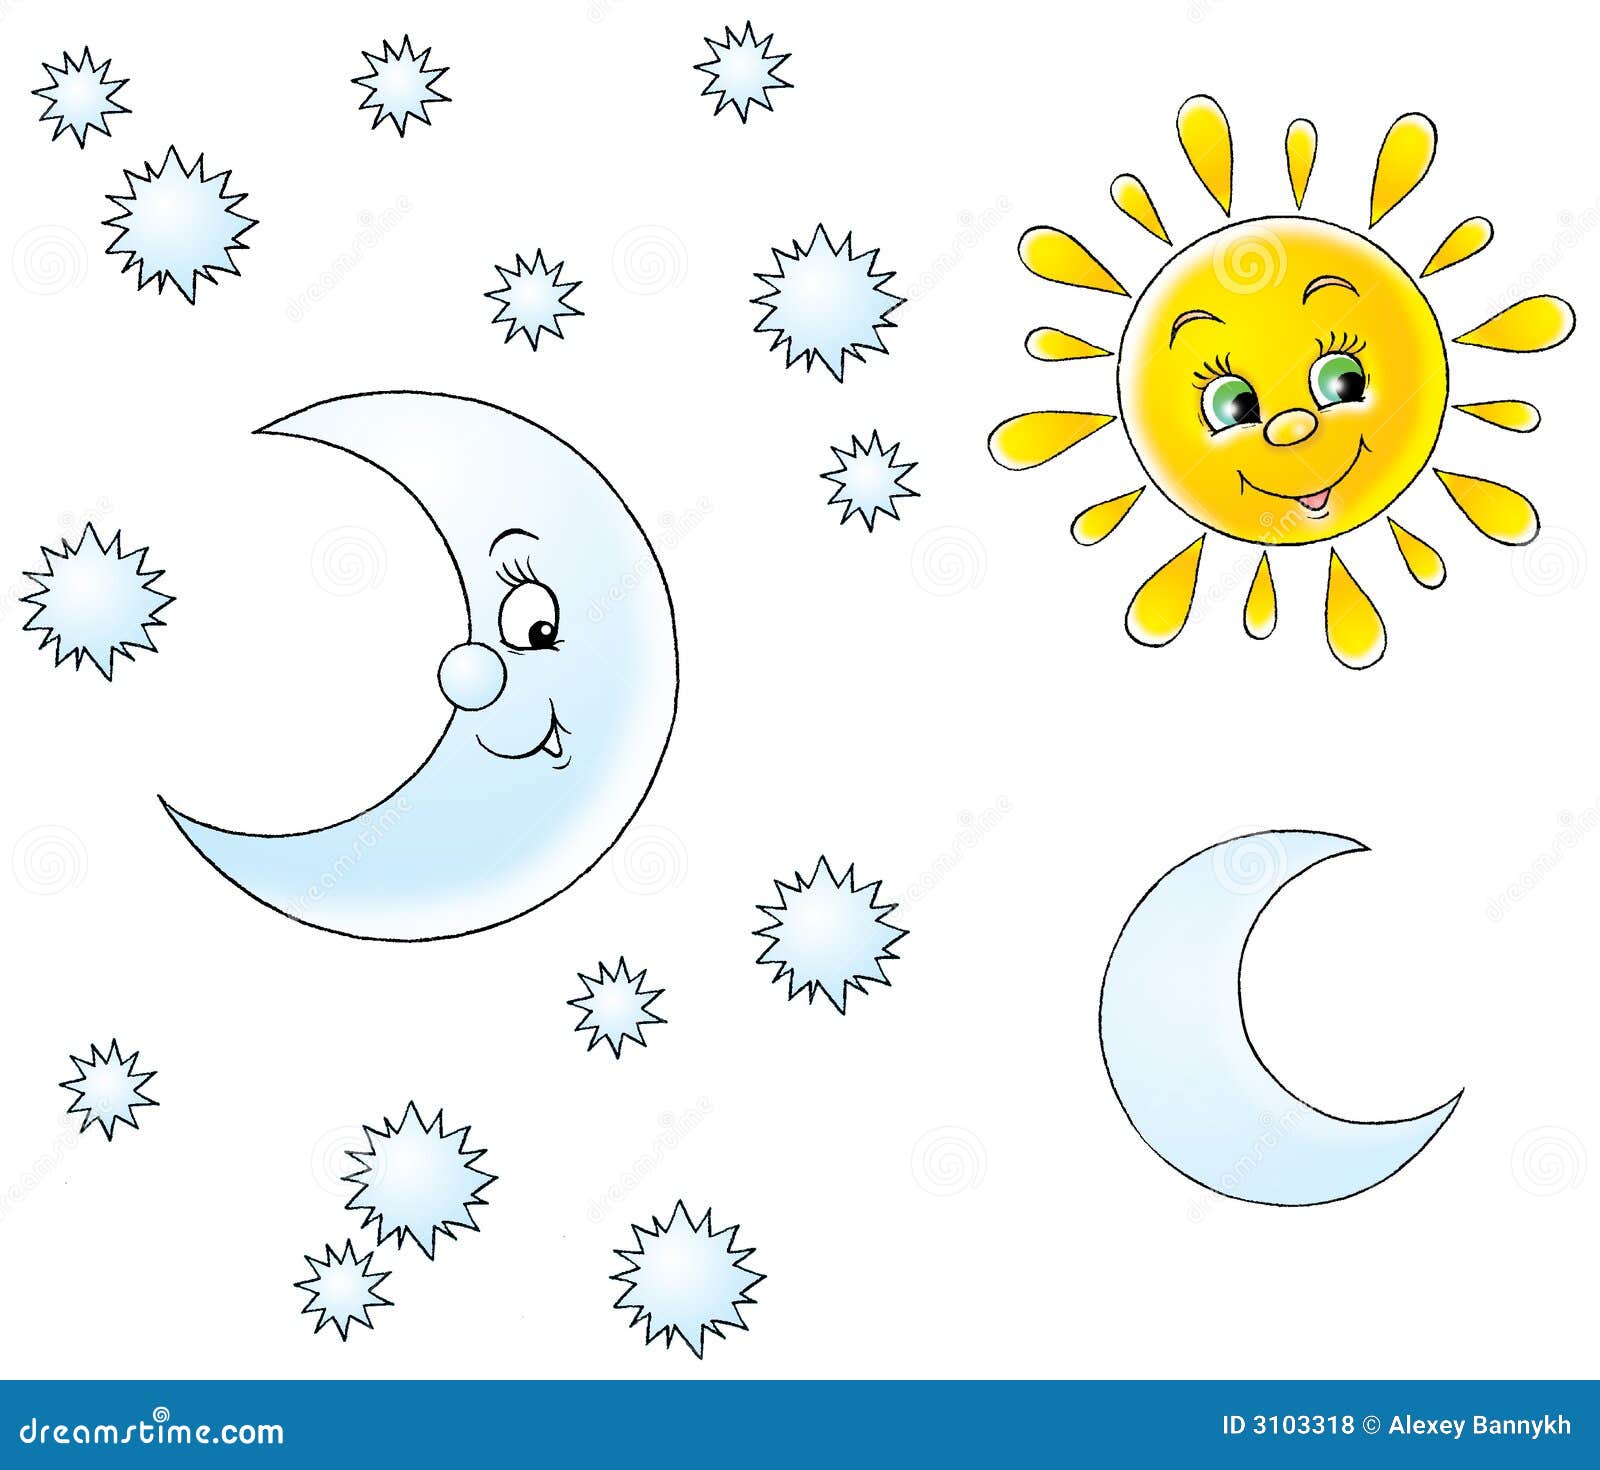 sun and moon clipart images - photo #38